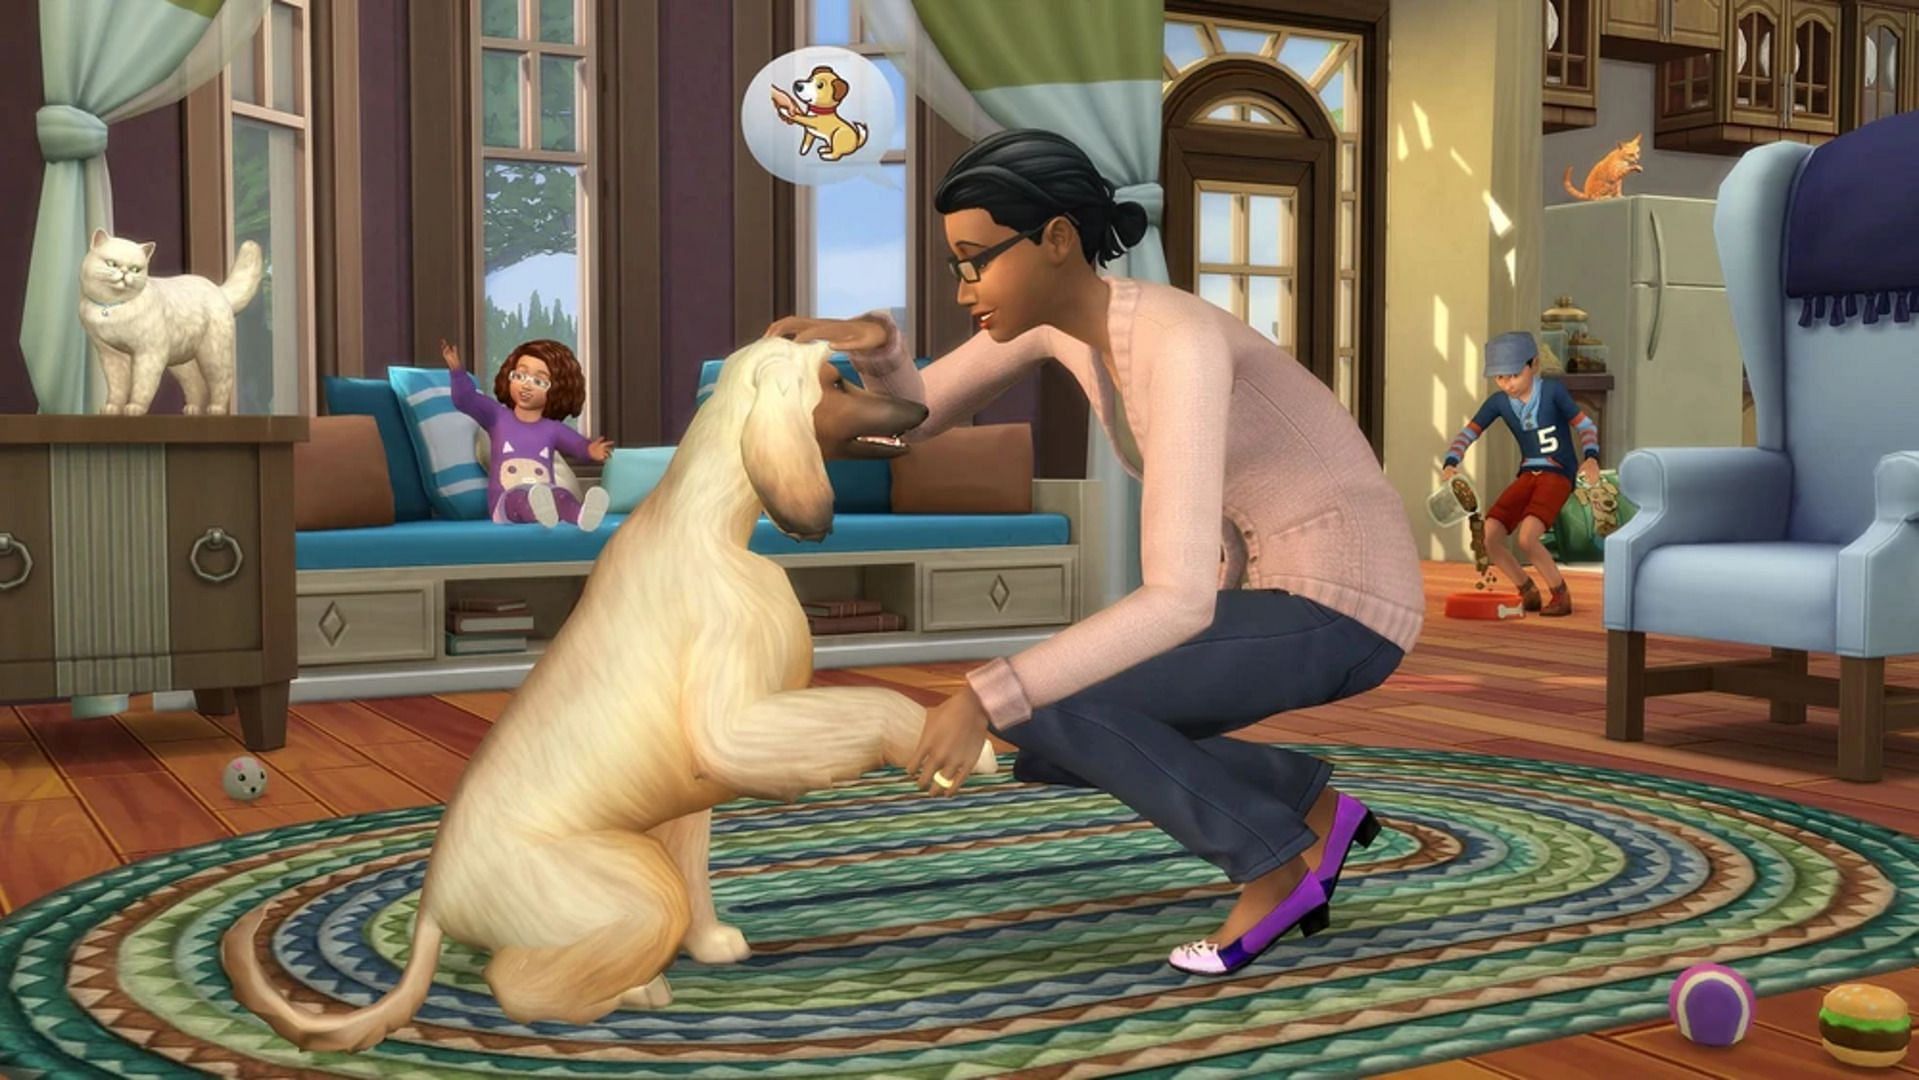 Learn to adopt an adorable pet in Sims 4 (Image via EA)